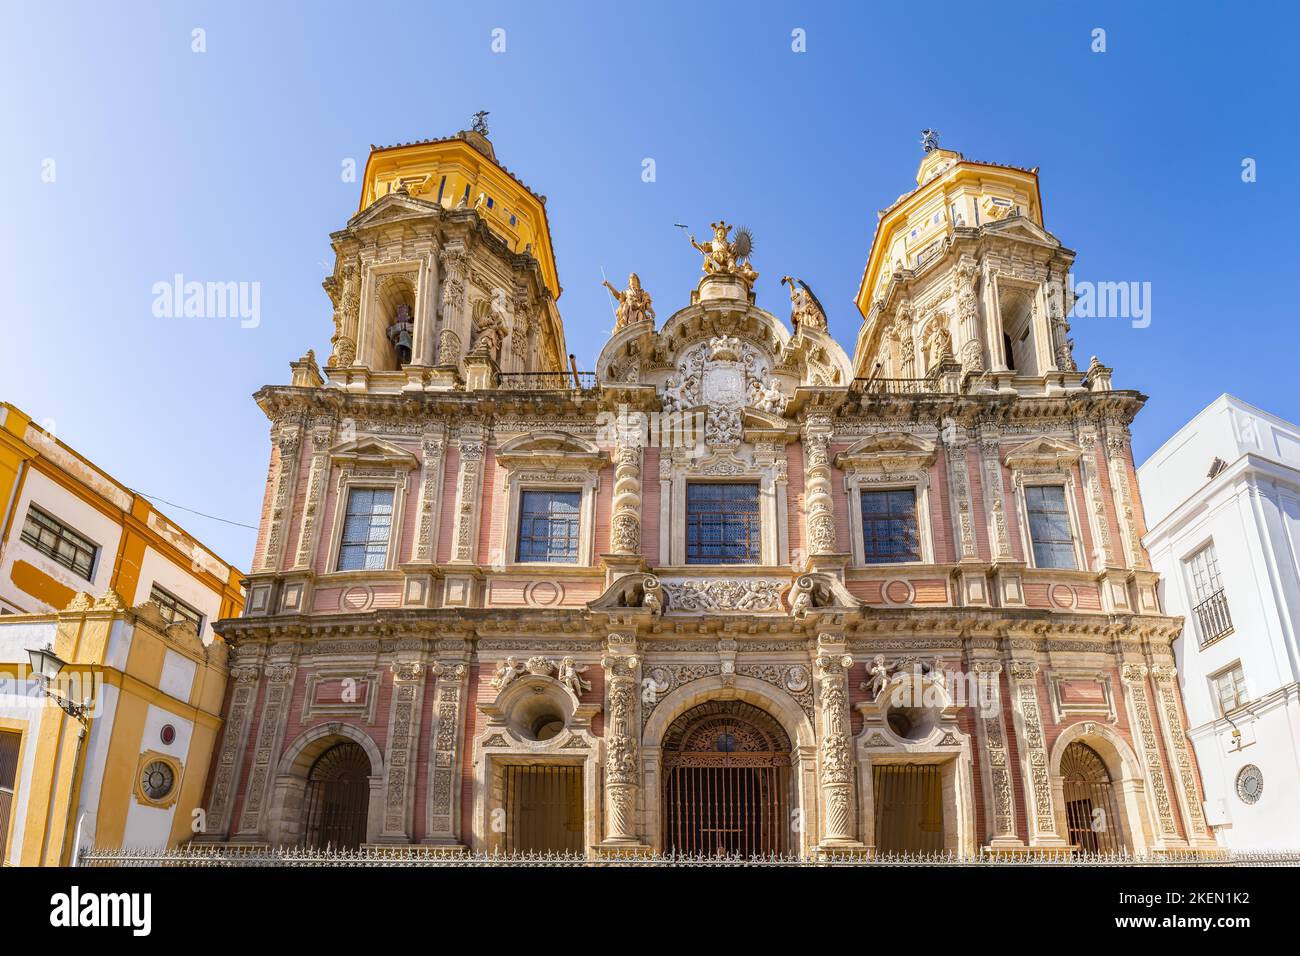 Facade of the beautiful ornate church of San Luis de los Franceses in historic town of Seville, Andalusia, Spain Stock Photo